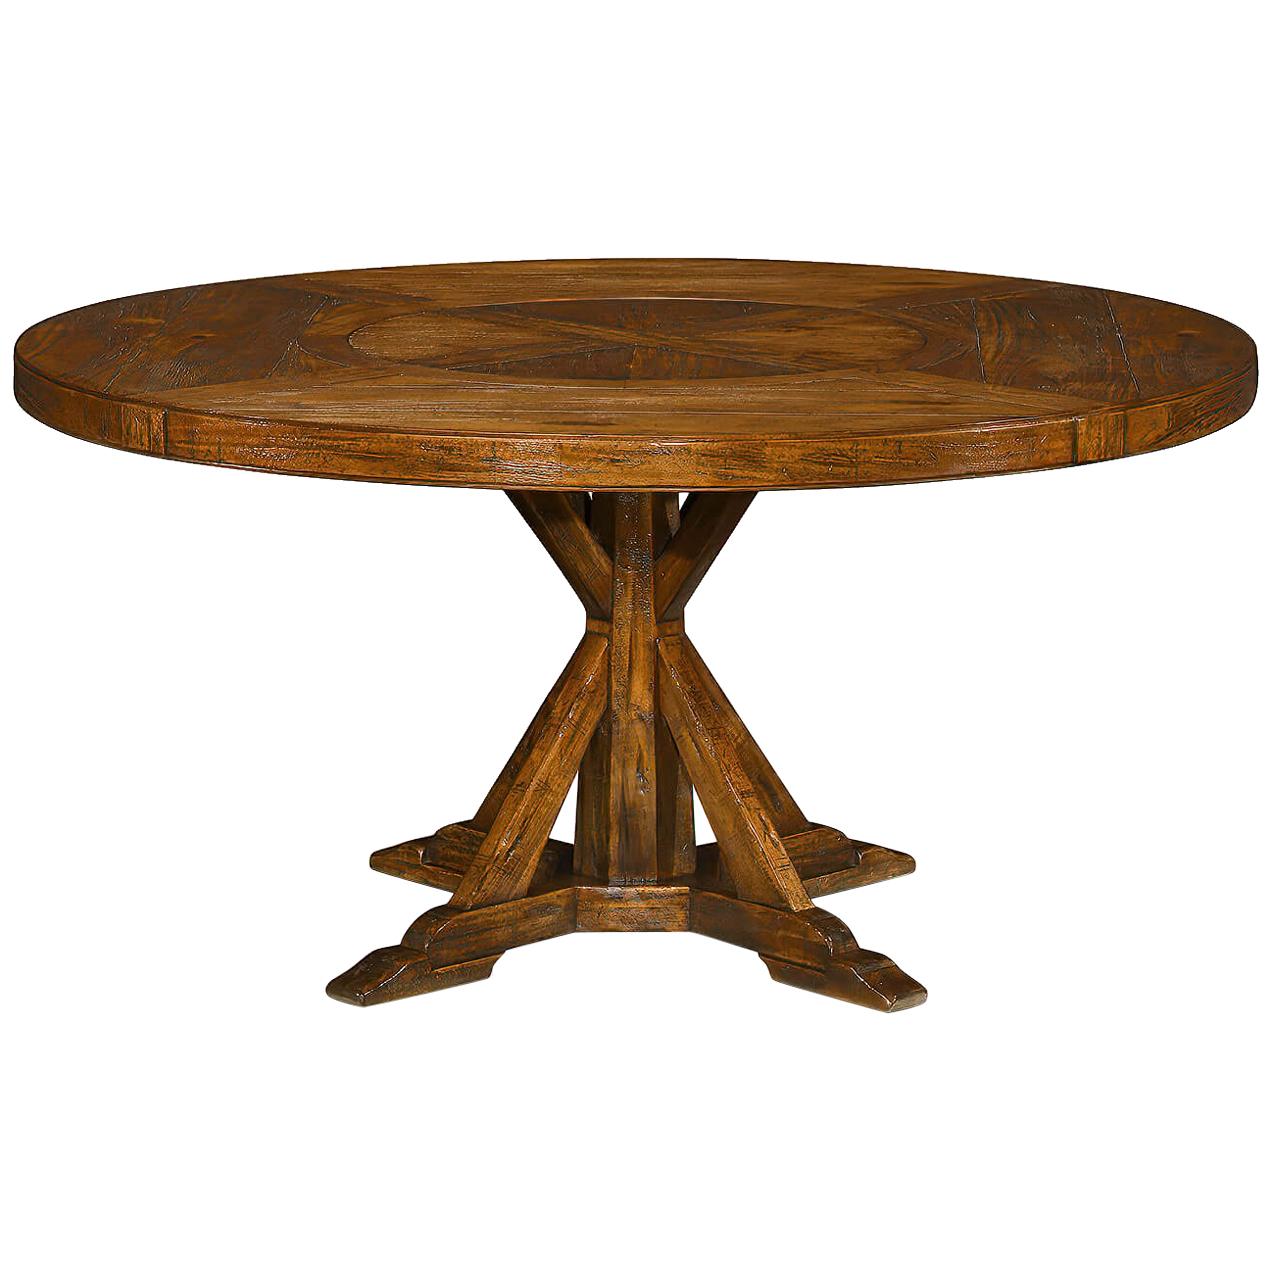 Rustic Round Dining Table, Walnut